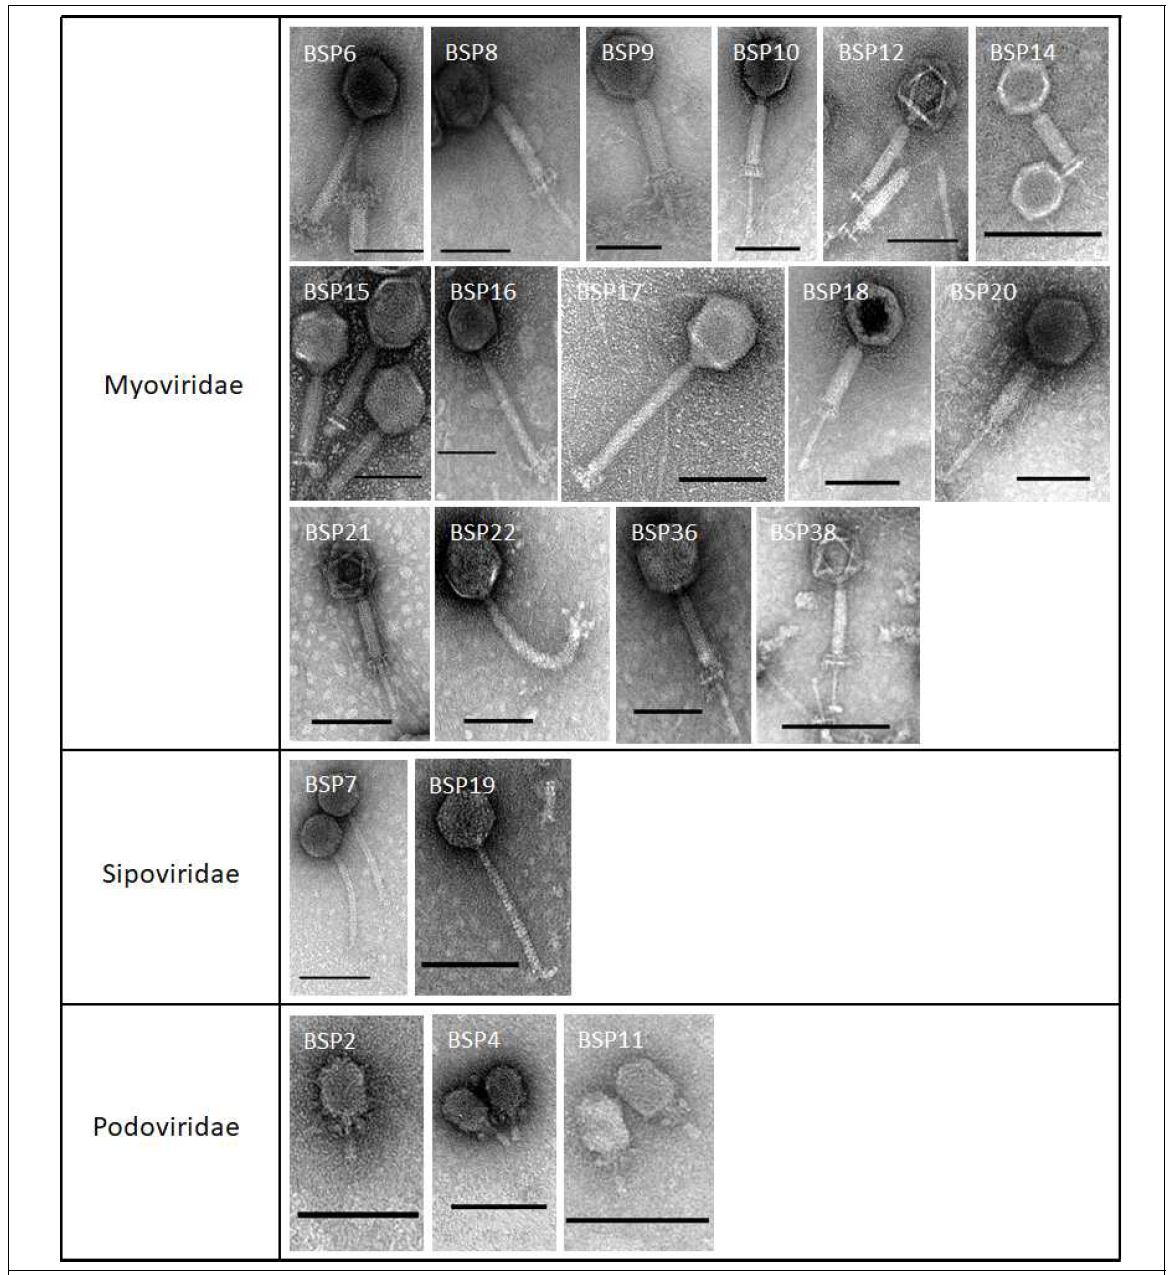 Morphological classification of 20 B. subtilis-infecting bacteriophages